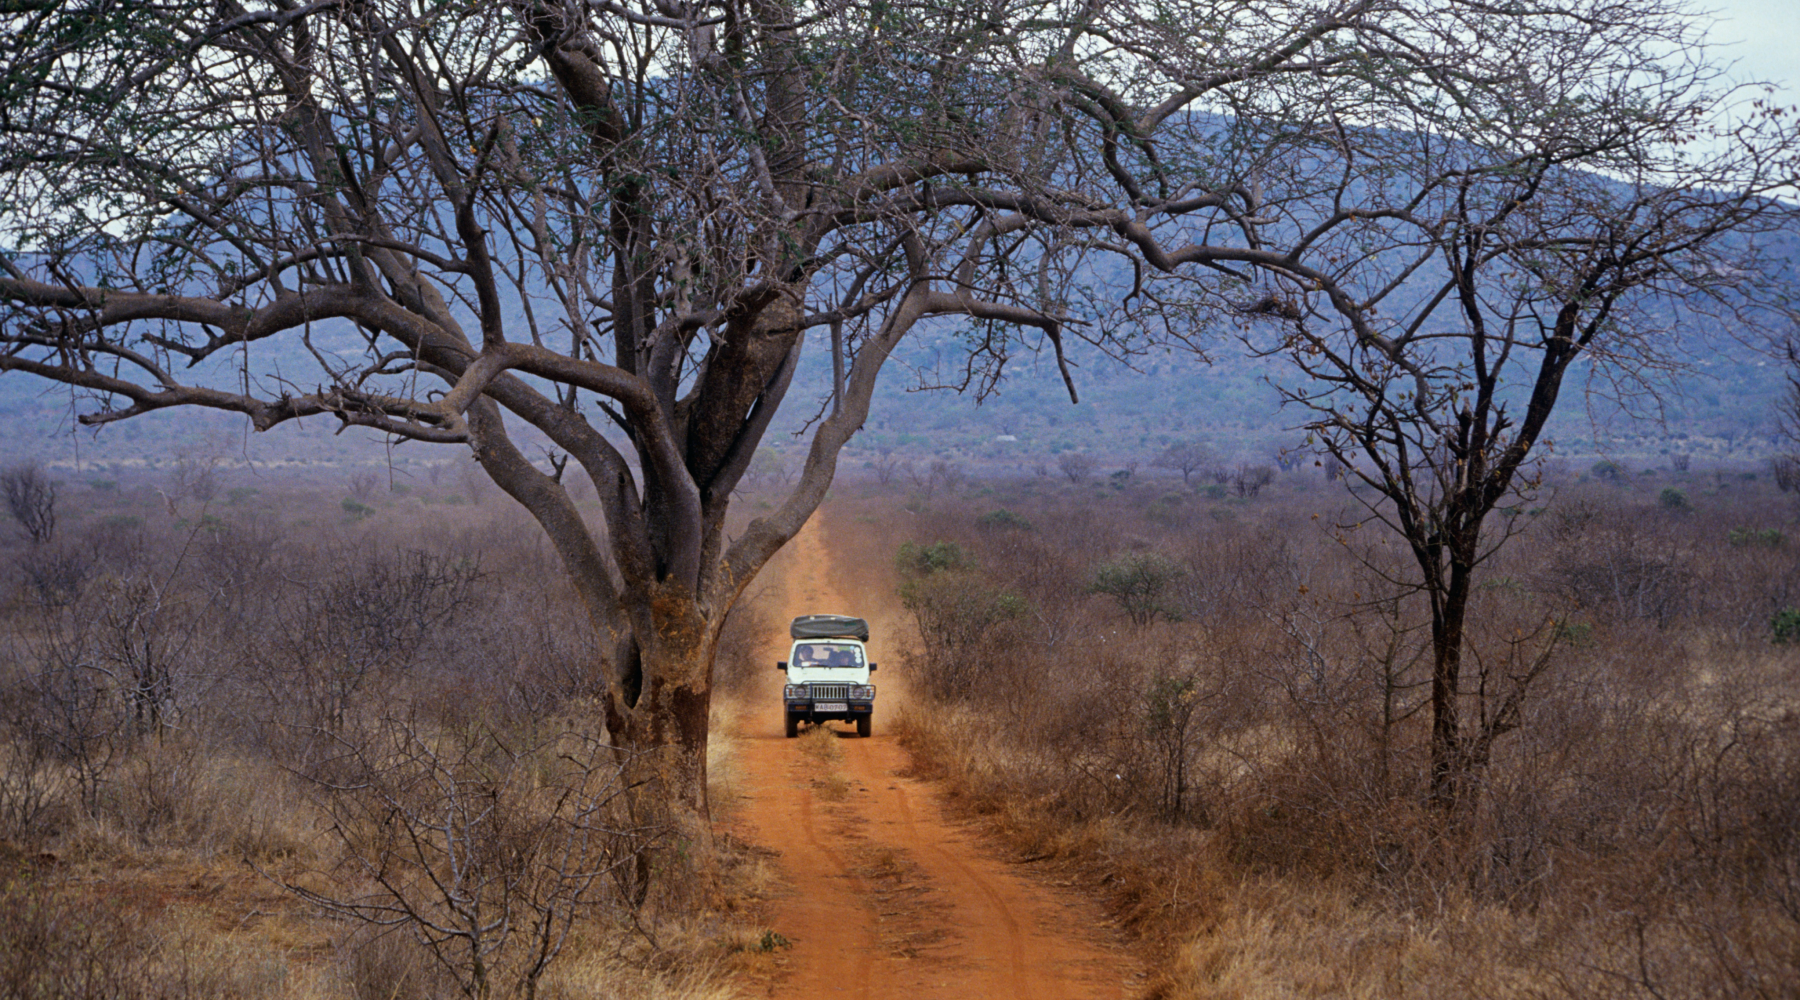 Small, white, overlanding vehicle travels along a dirt road in Africa.